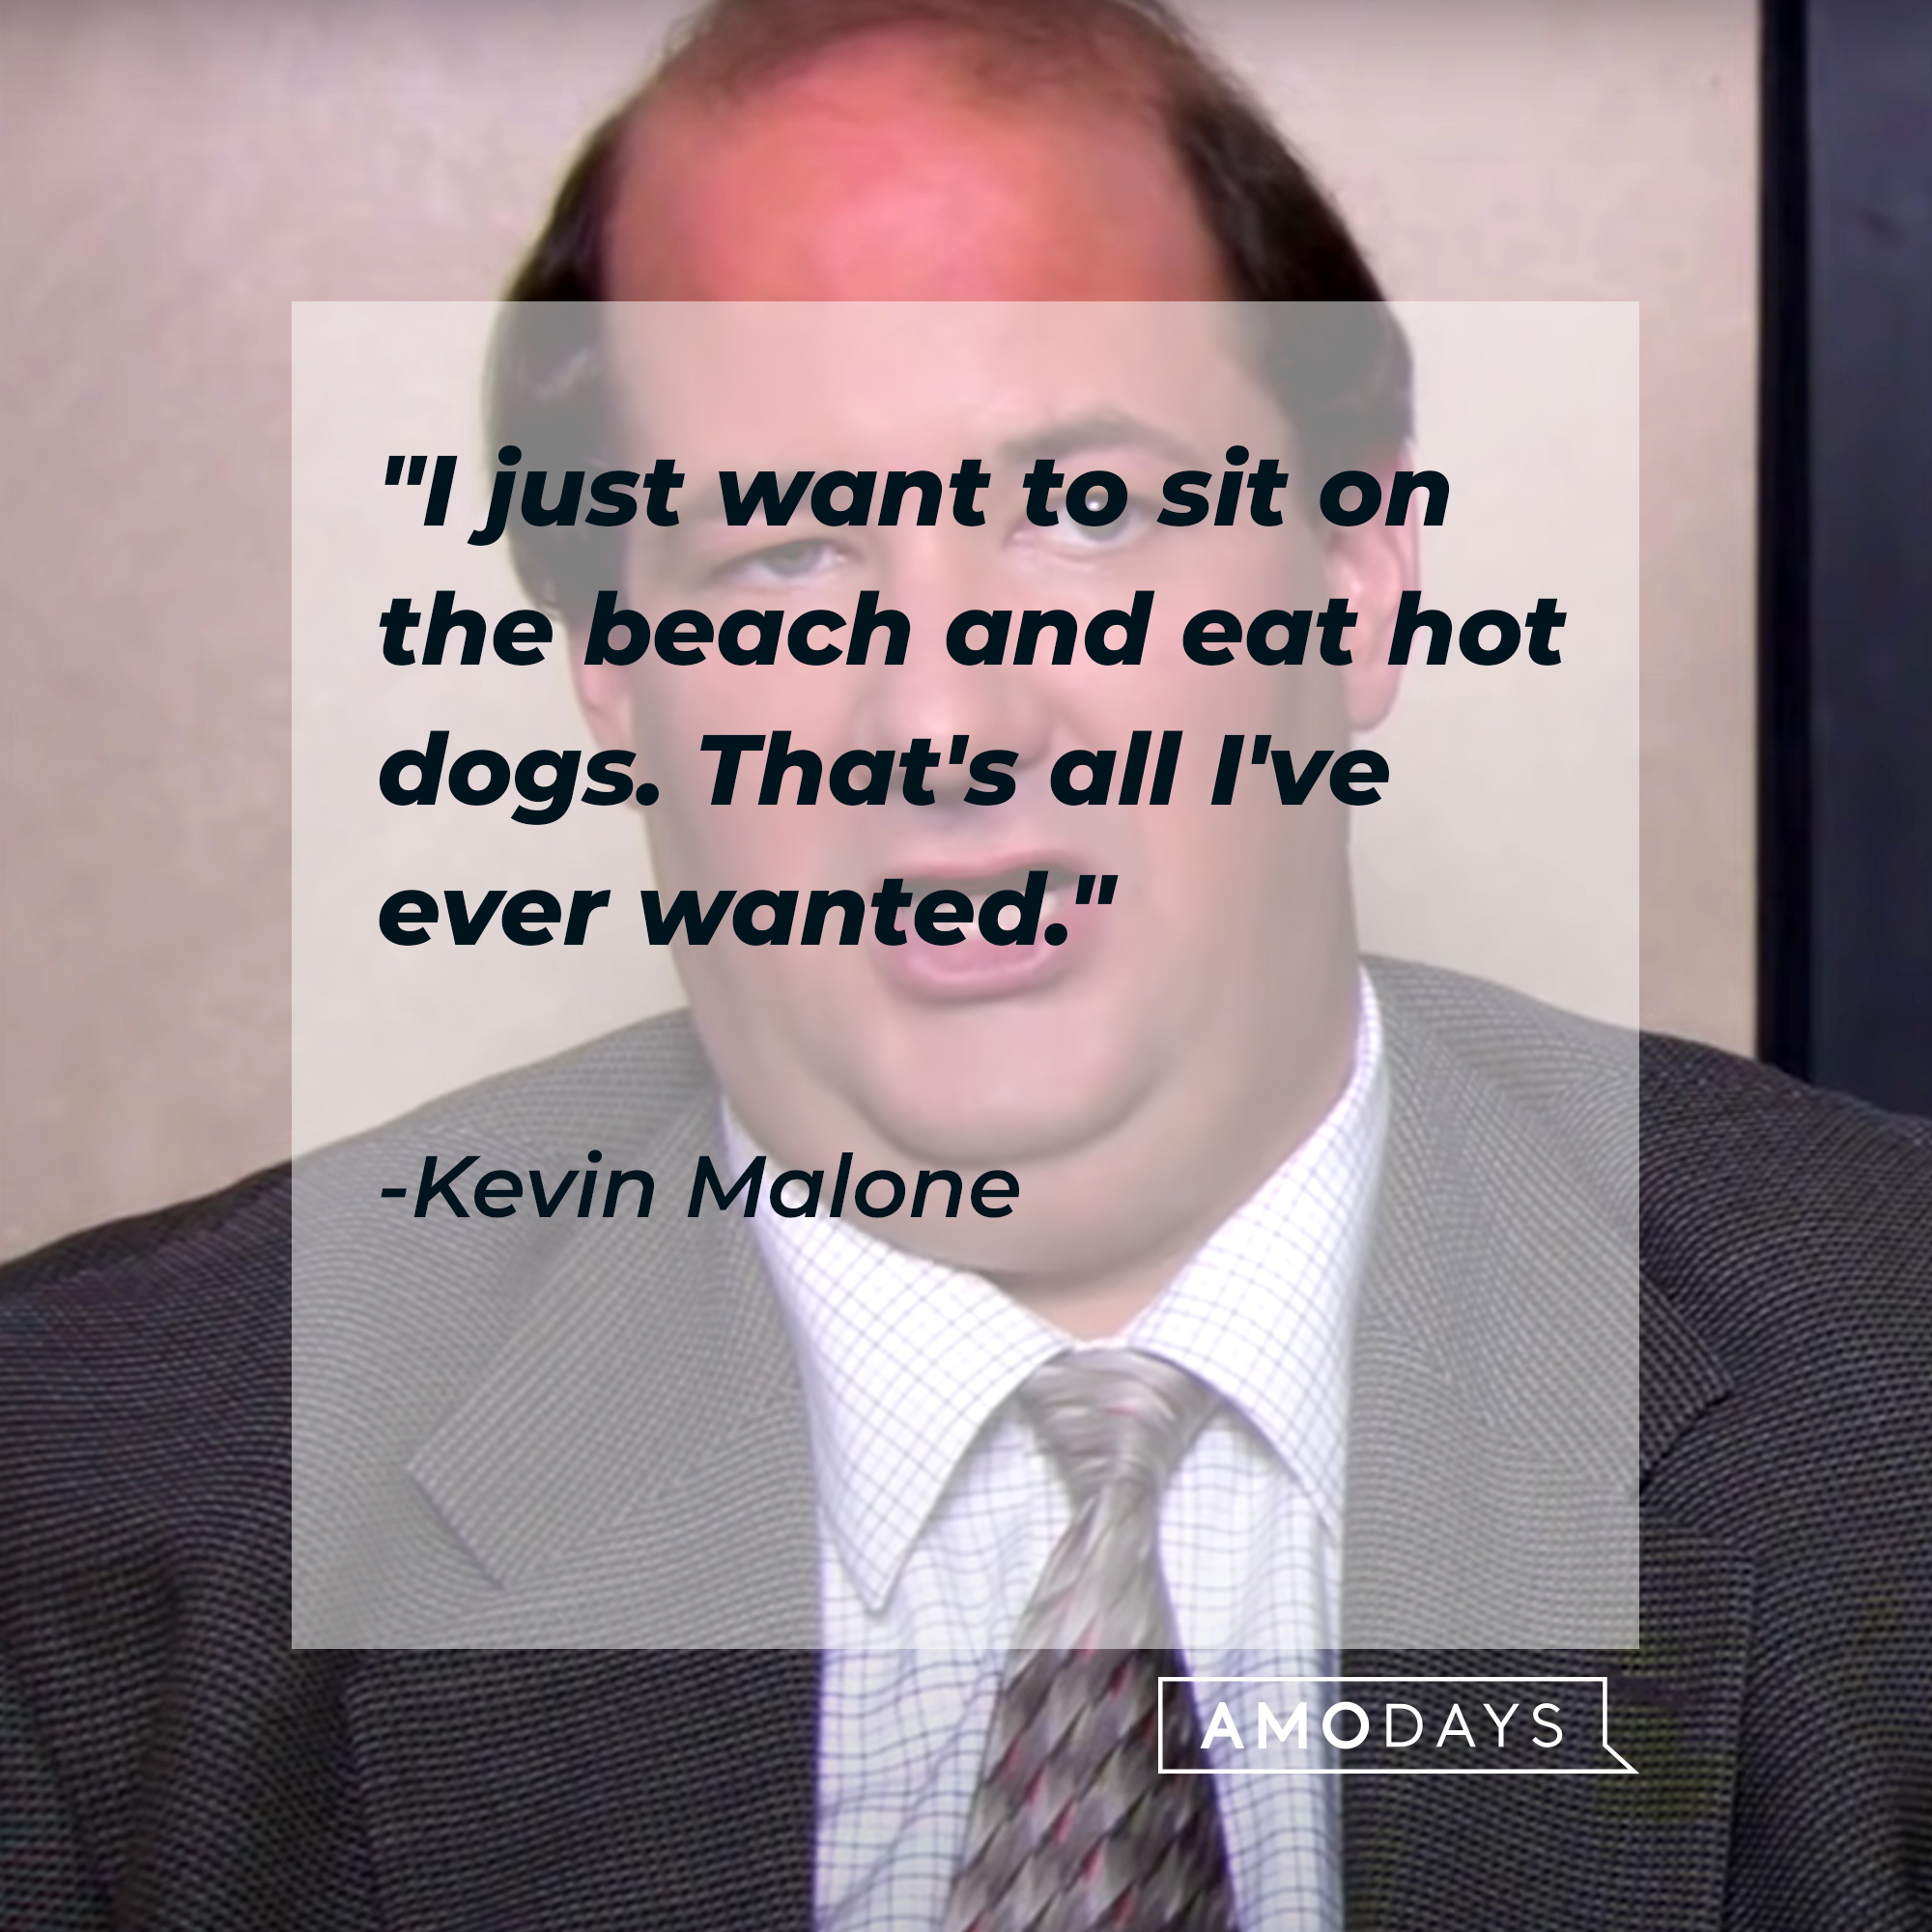 Kevin Malone's quote: "I just want to sit on the beach and eat hot dogs. That's all I've ever wanted." | Source: youtube.com/TheOffice